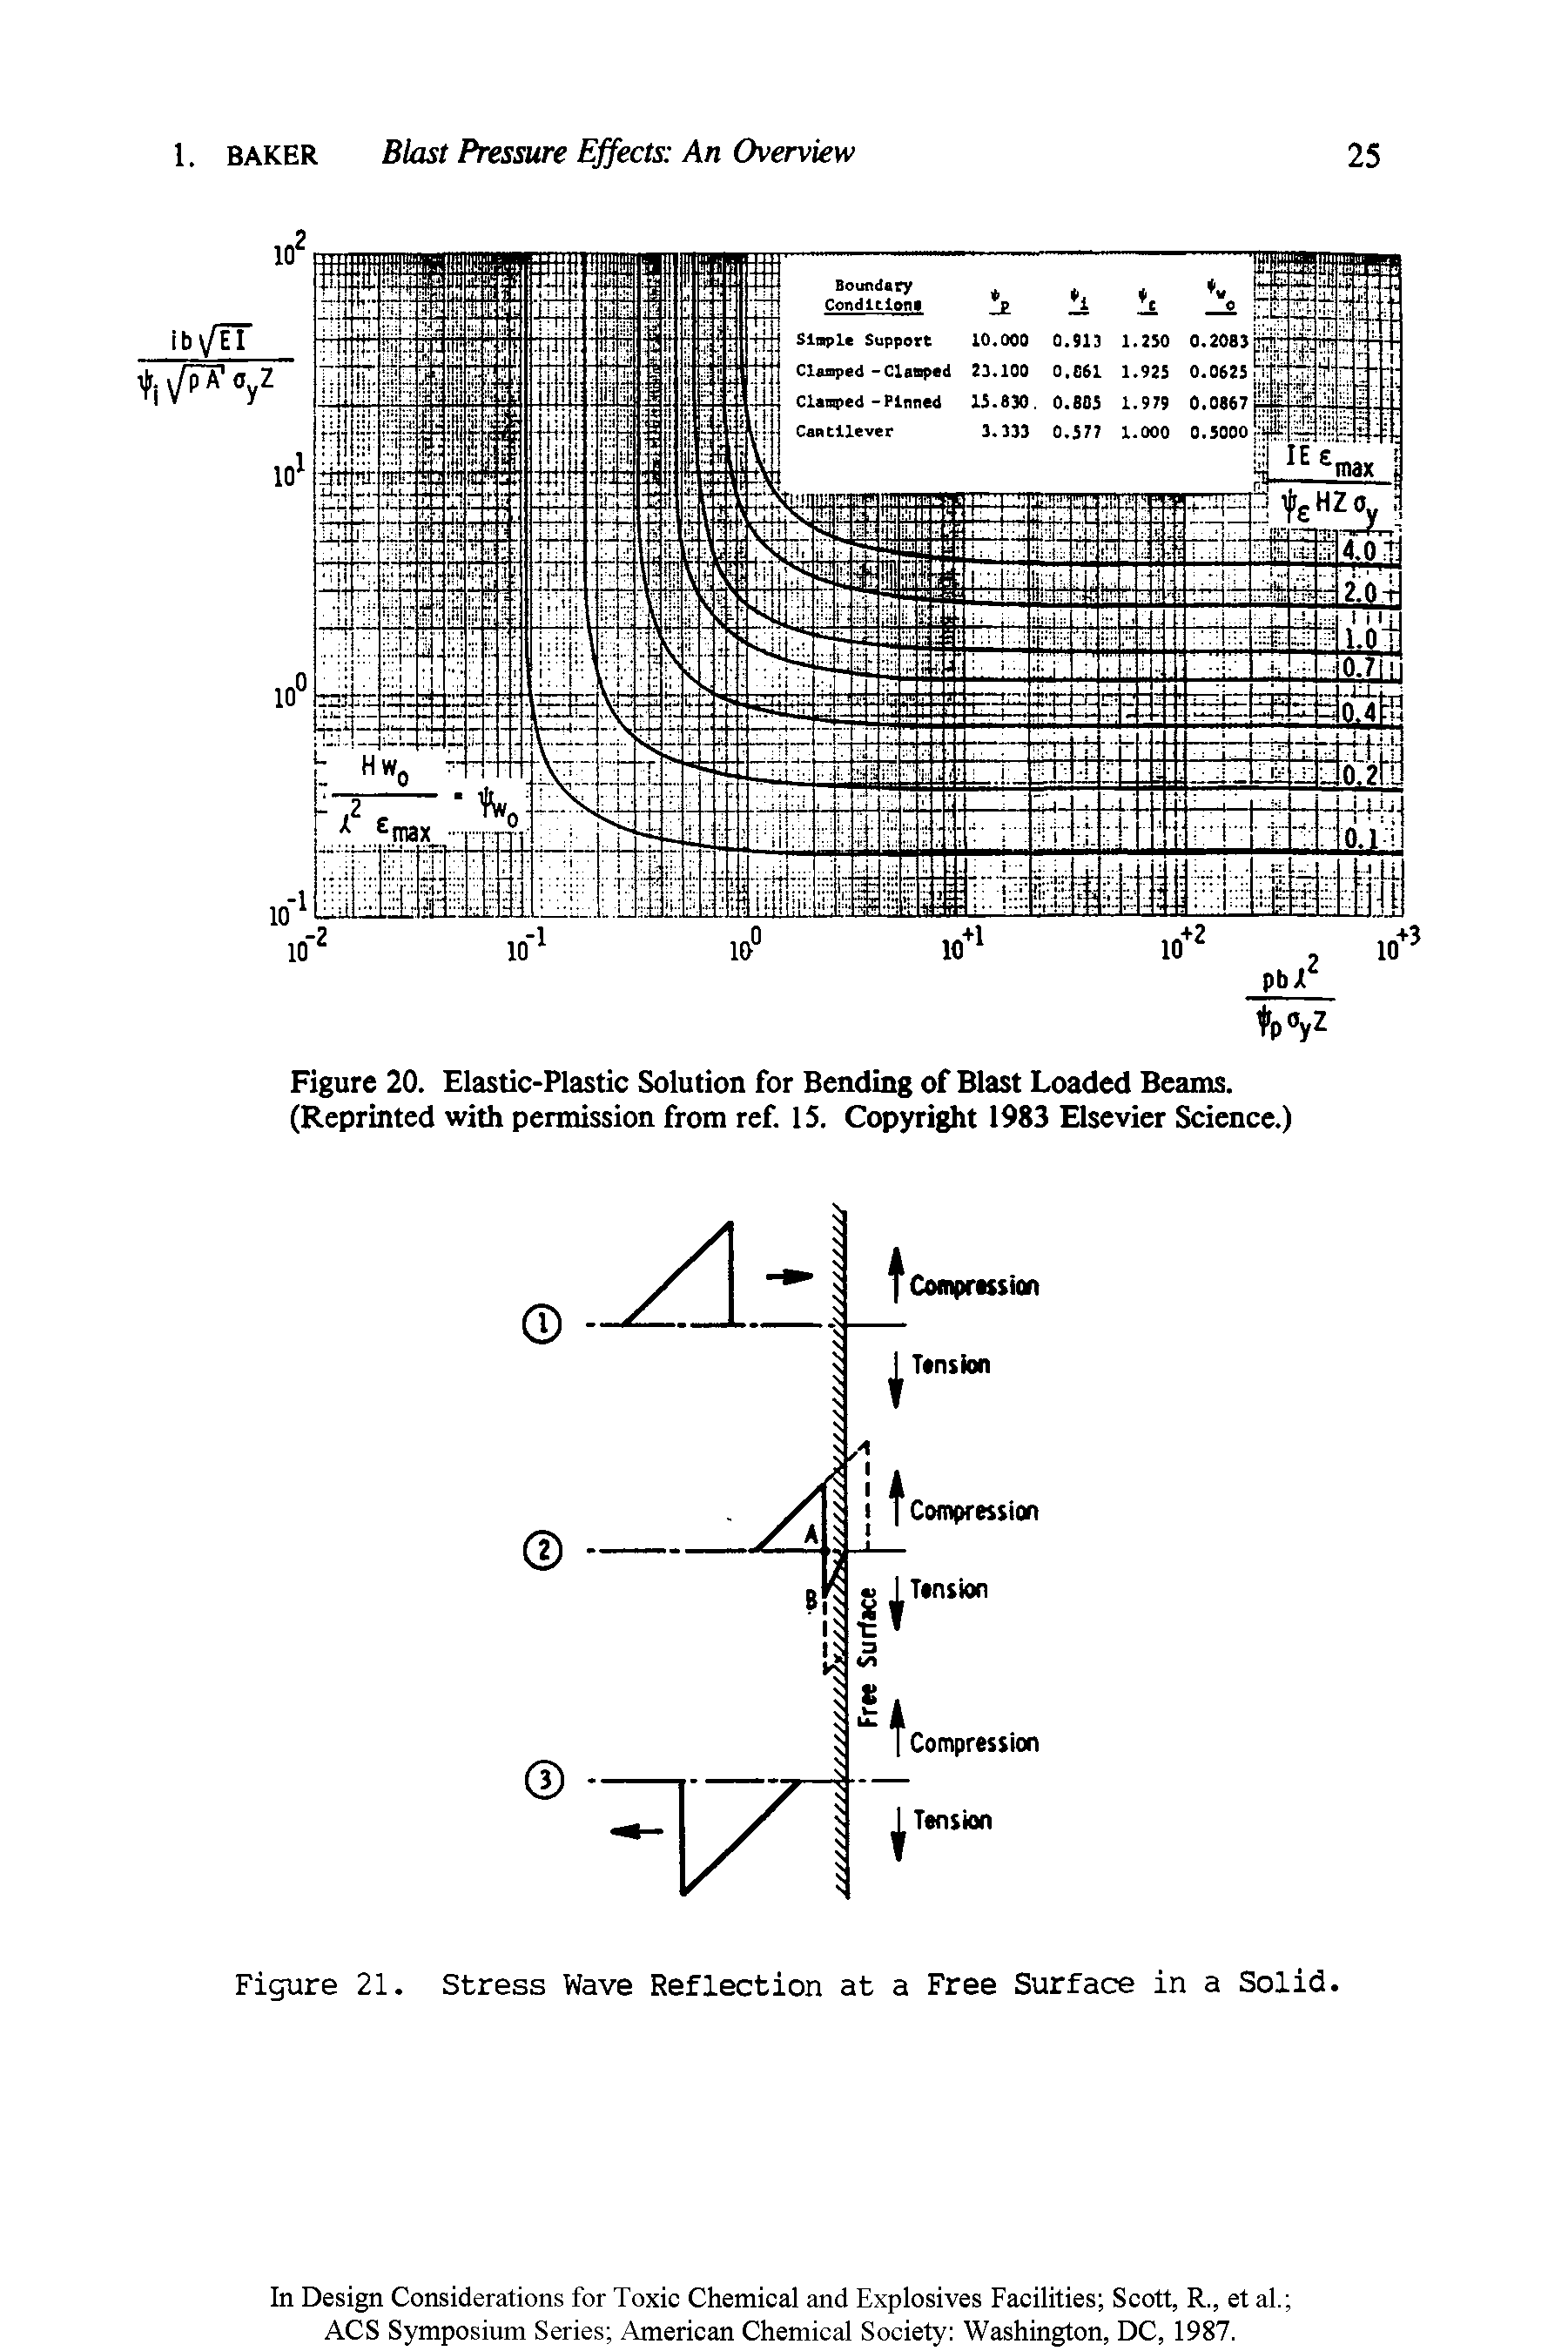 Figure 20. Elastic-Plastic Solution for Bending of Blast Loaded Beams. (Reprinted with permission from ref. 15. Copyright 1983 Elsevier Science.)...